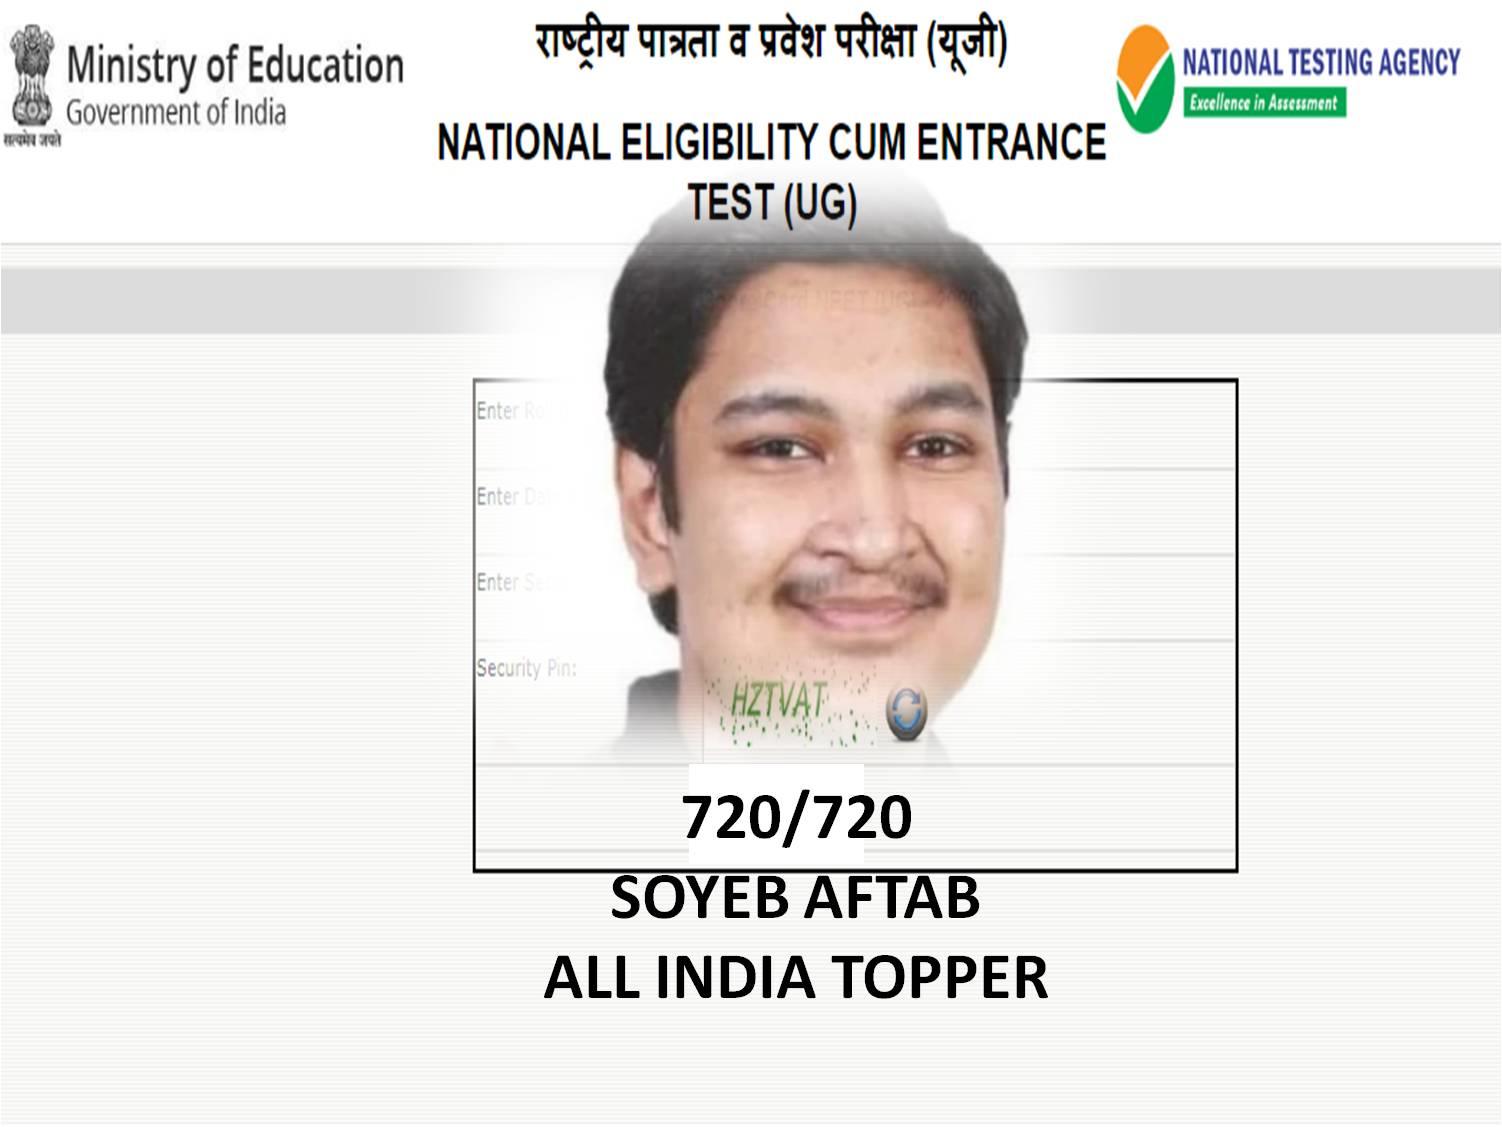 NEET 2020 topper Soyeb Aftab with 100 percent score has no doctor in the family - NEET results declared